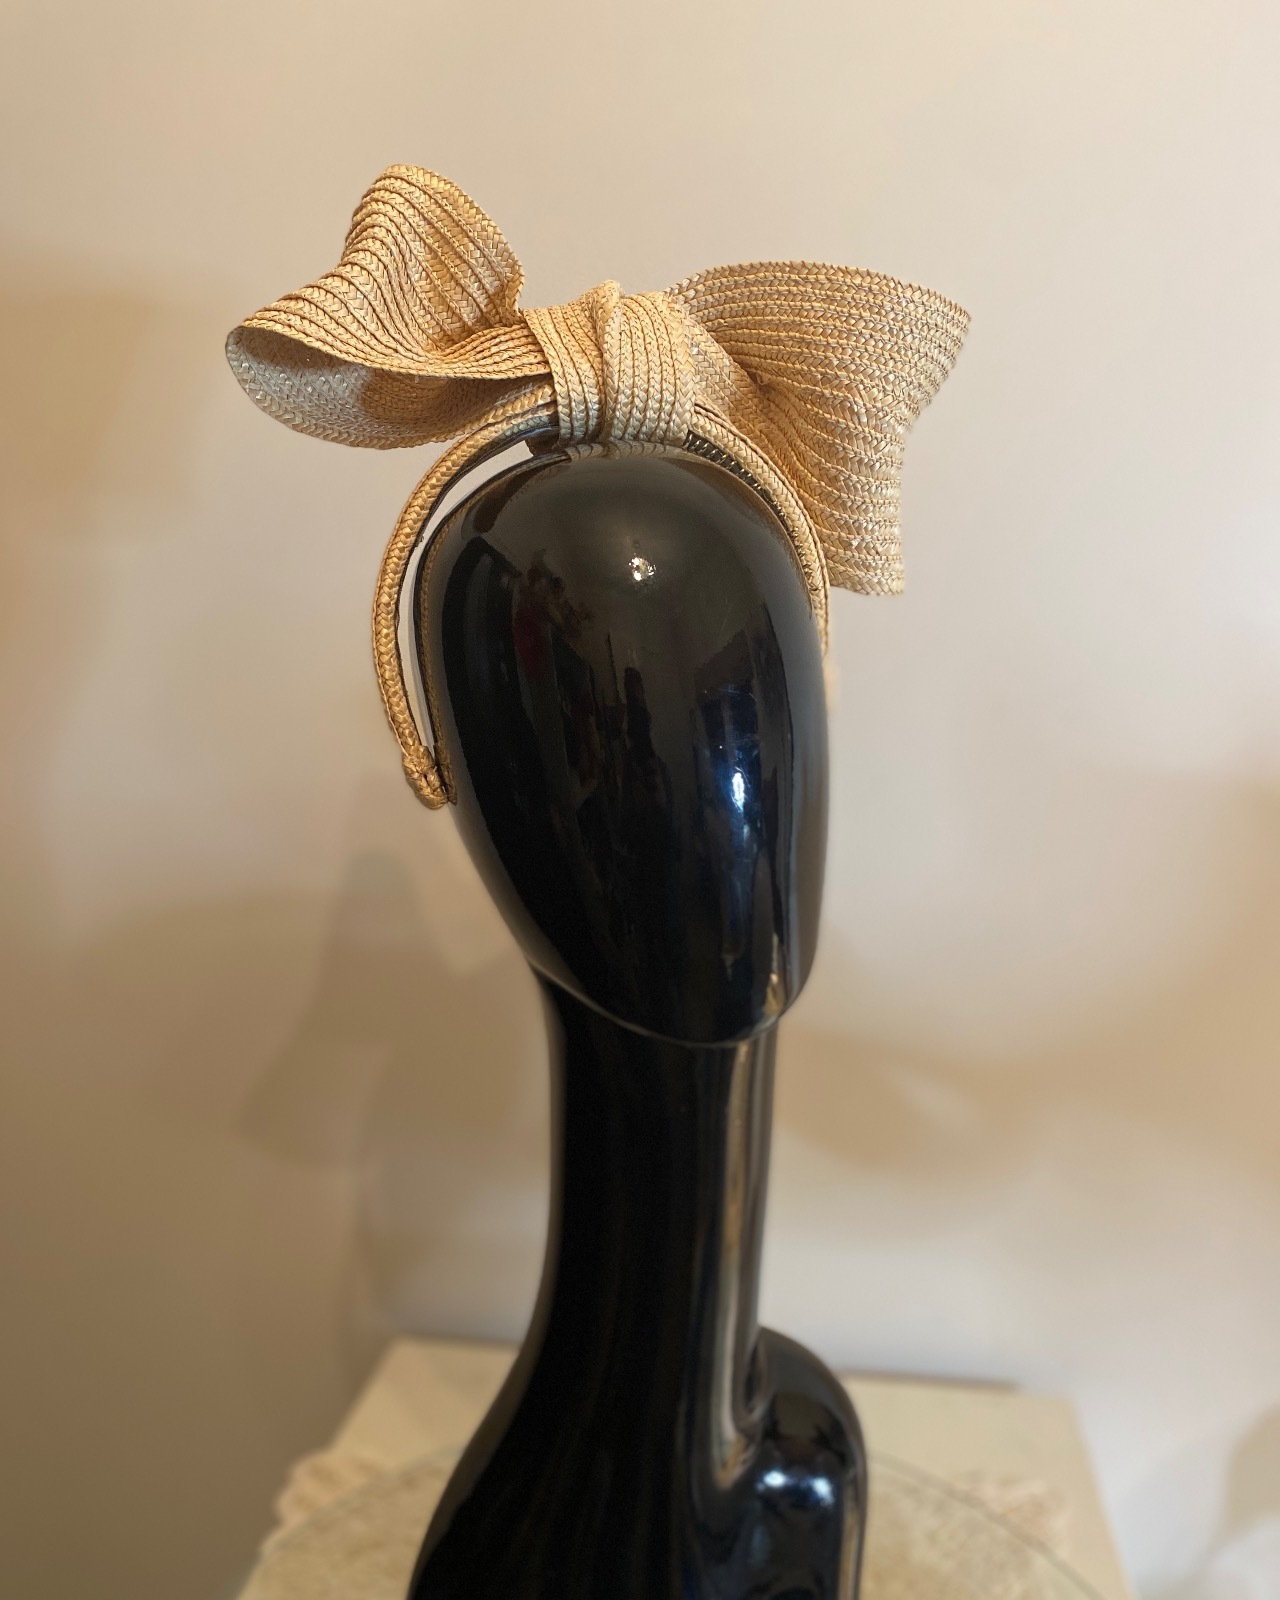 Natural Straw Bow – Rebecca Hillis Millinery